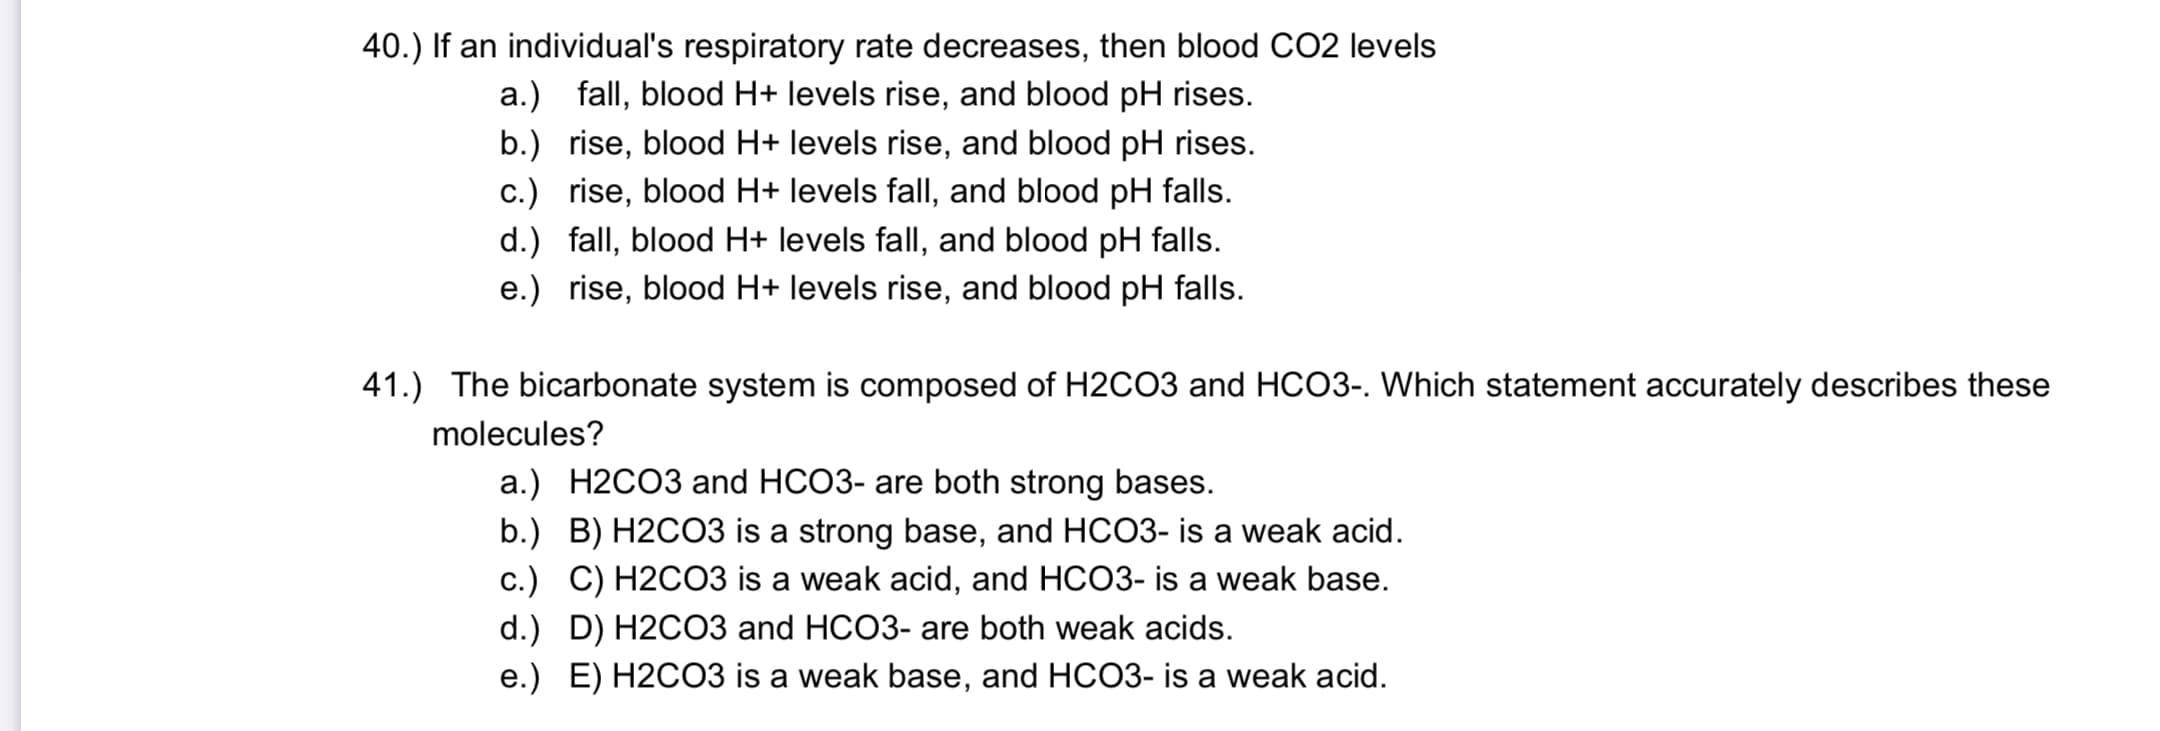 41.) The bicarbonate system is composed of H2C03 and HCO3-. Which statement accurately describes these
molecules?
a.) H2CO3 and HCO3- are both strong bases.
b.) B) H2CO3 is a strong base, and HCO3- is a weak acid.
c.) C) H2CO3 is a weak acid, and HCO3- is a weak base.
d.) D) H2CO3 and HCO3- are both weak acids.
e.) E) H2CO3 is a weak base, and HCO3- is a weak acid.
